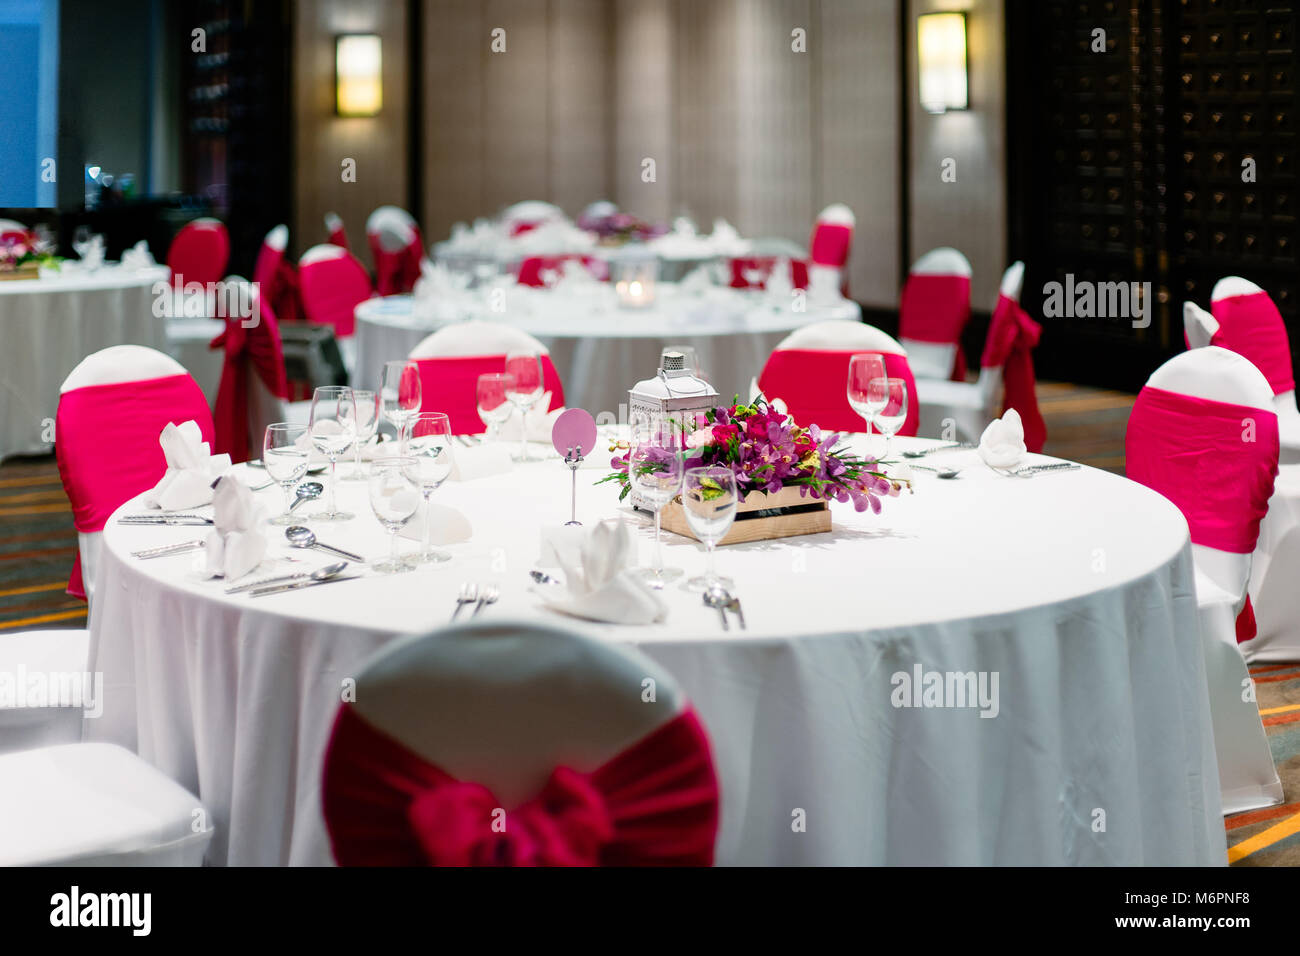 The wedding reception dinner table decorated with orchids, flowers, candle, White spandex chairs cover with red organza sash Stock Photo